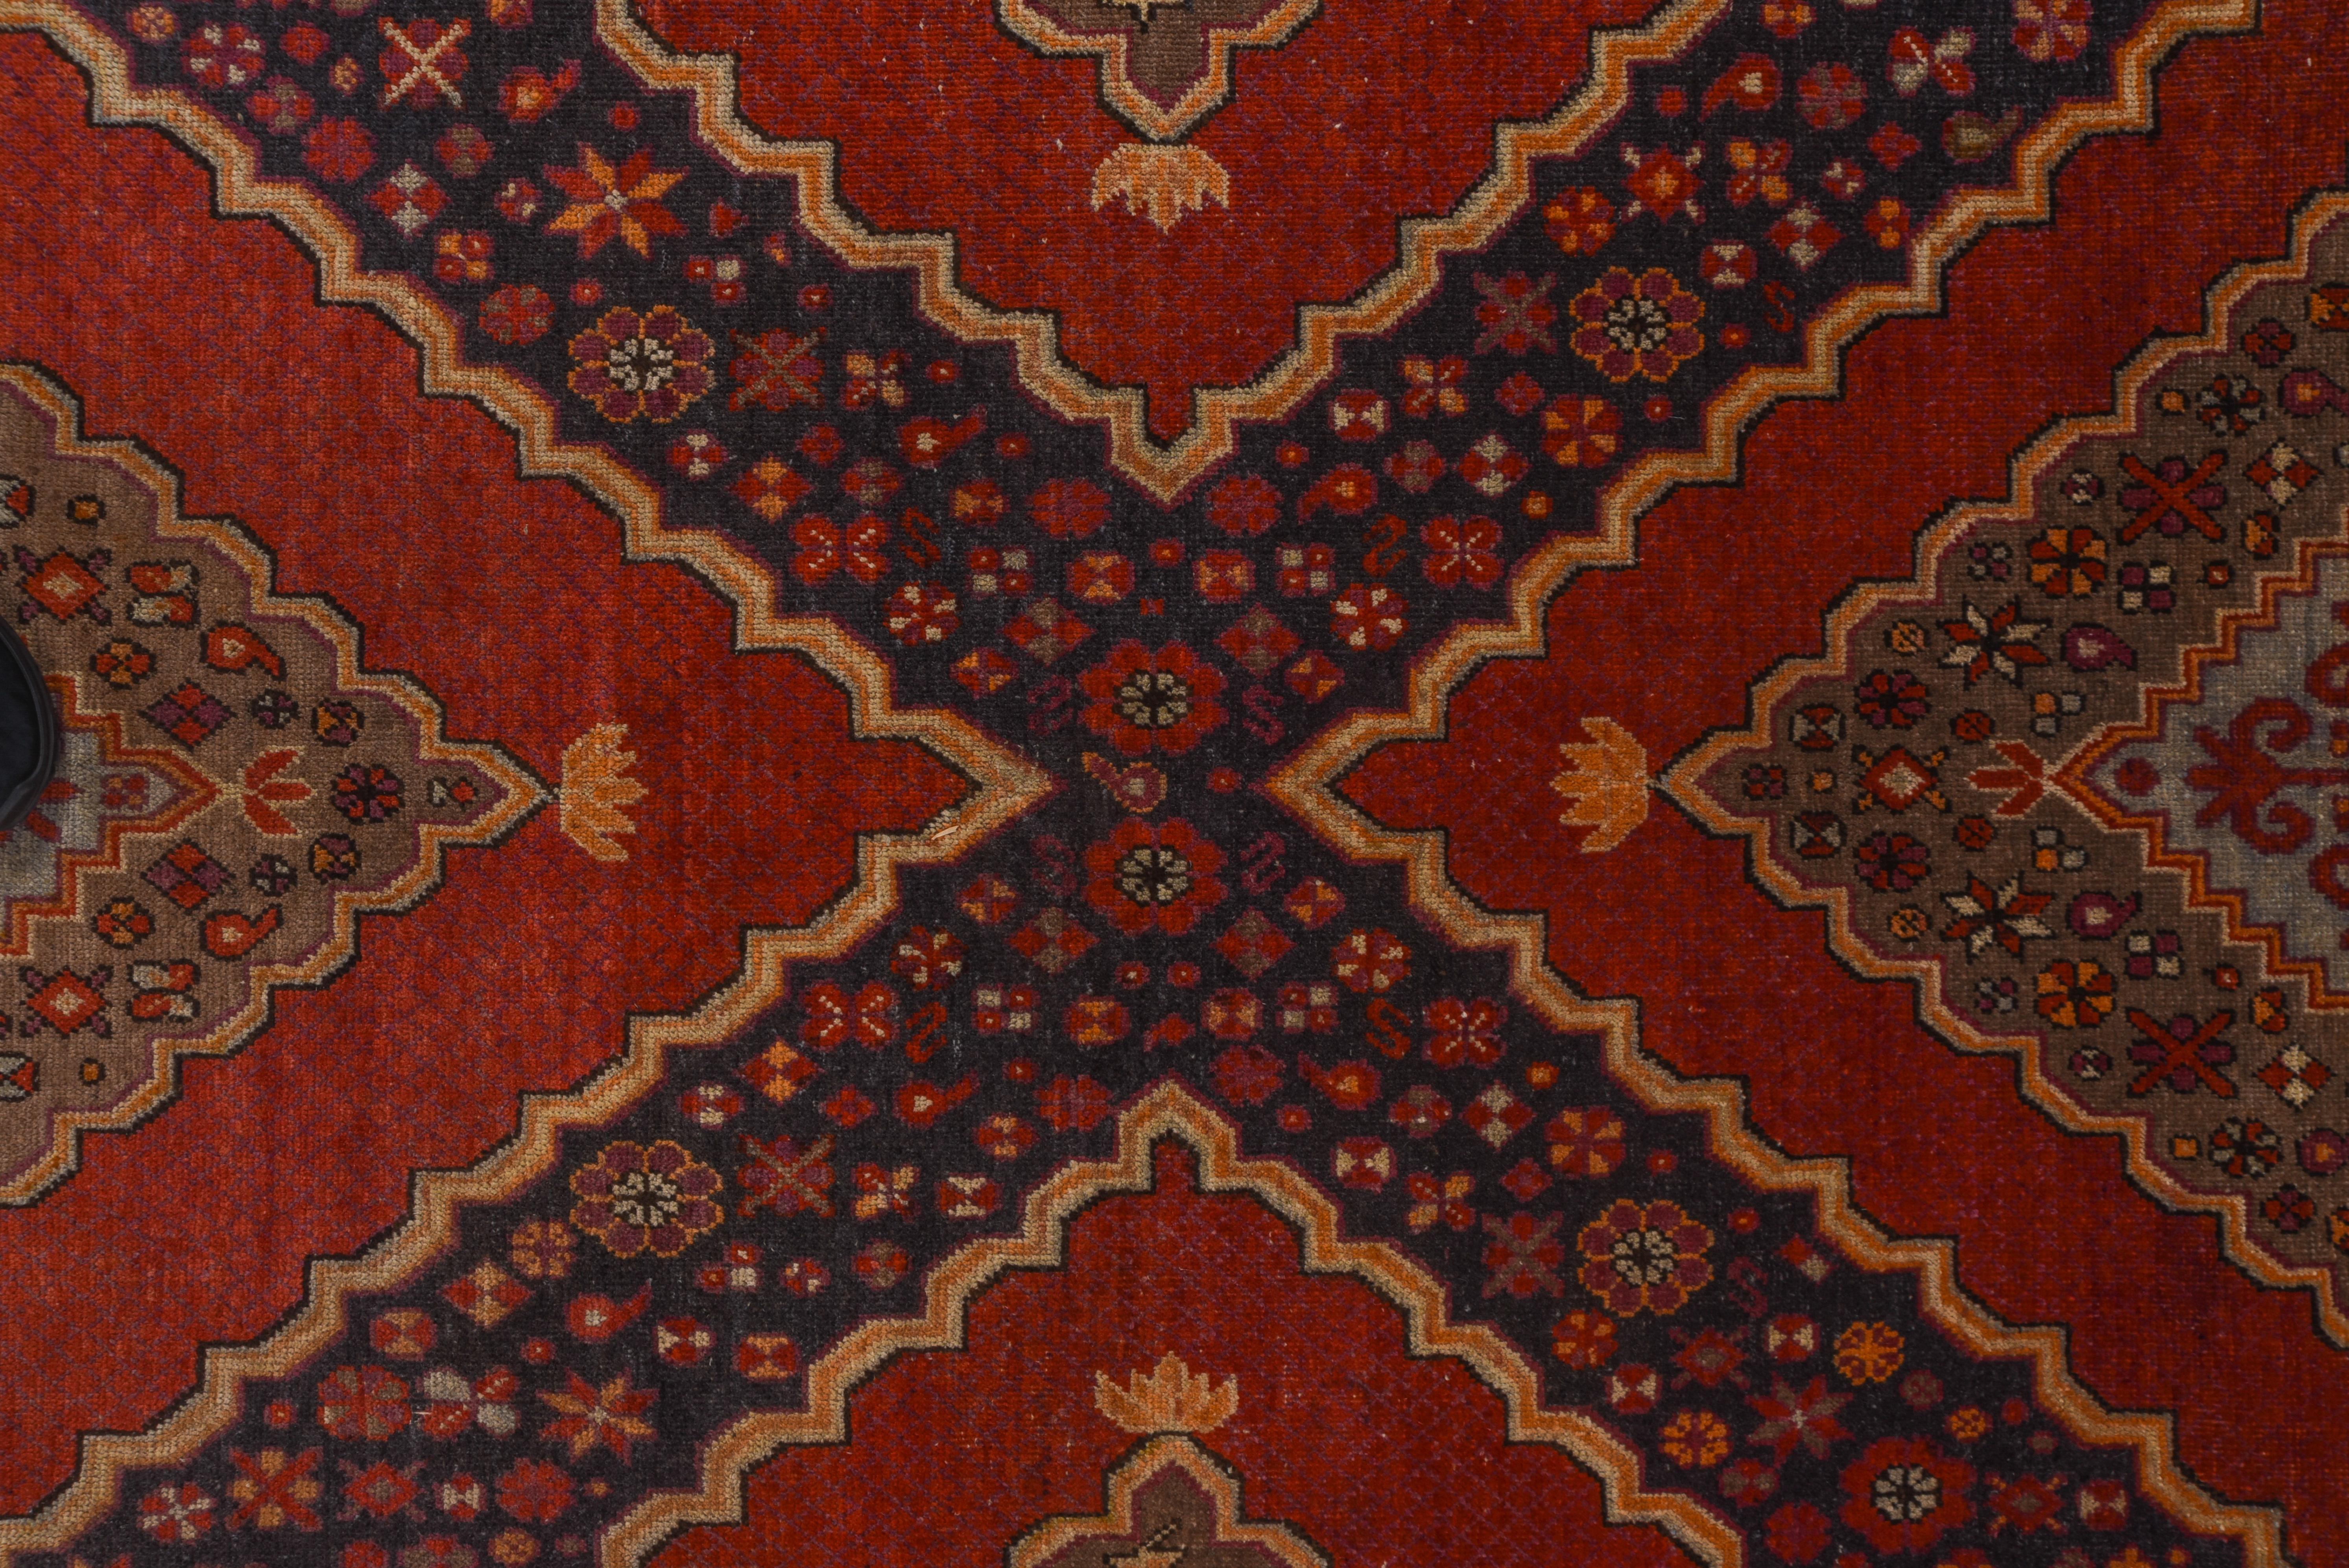 A double layered scalloped diamond pattern and en suite triangular side fillers in red, slate blue and celadon fills the field , and a teal border of double voluted lozenges frames the whole of this Xinjiang Province town carpet.